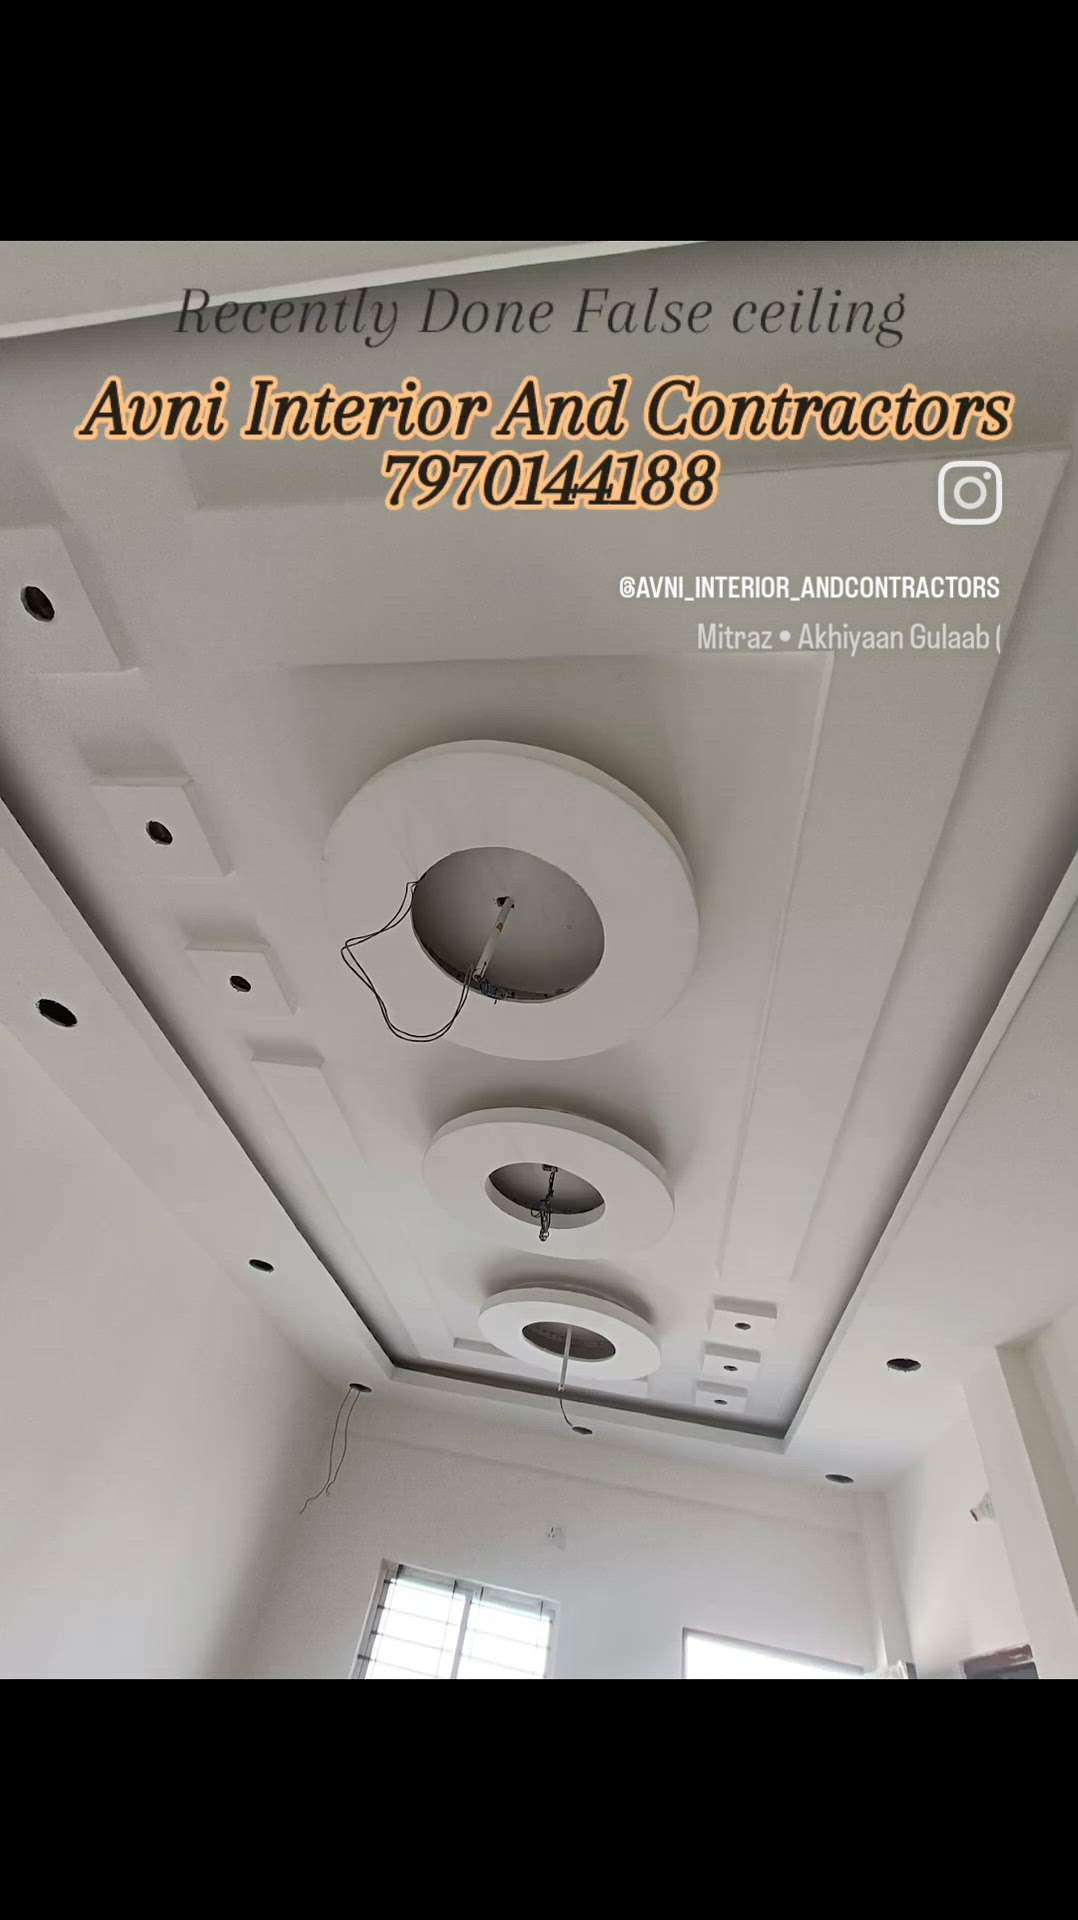 False Ceiling The most important part of interior designing contact for more information 
 #FalseCeiling   #falseceilinghome  #FalseCeilinideas #falseceilingdesign #kitchen_false_ceiling #falseceiling_llighting #PVCFalseCeiling #GypsumCeiling #Gypsam #SaintGobainGyproc #InteriorDesigner #intereriorwork #Contractor #contracting